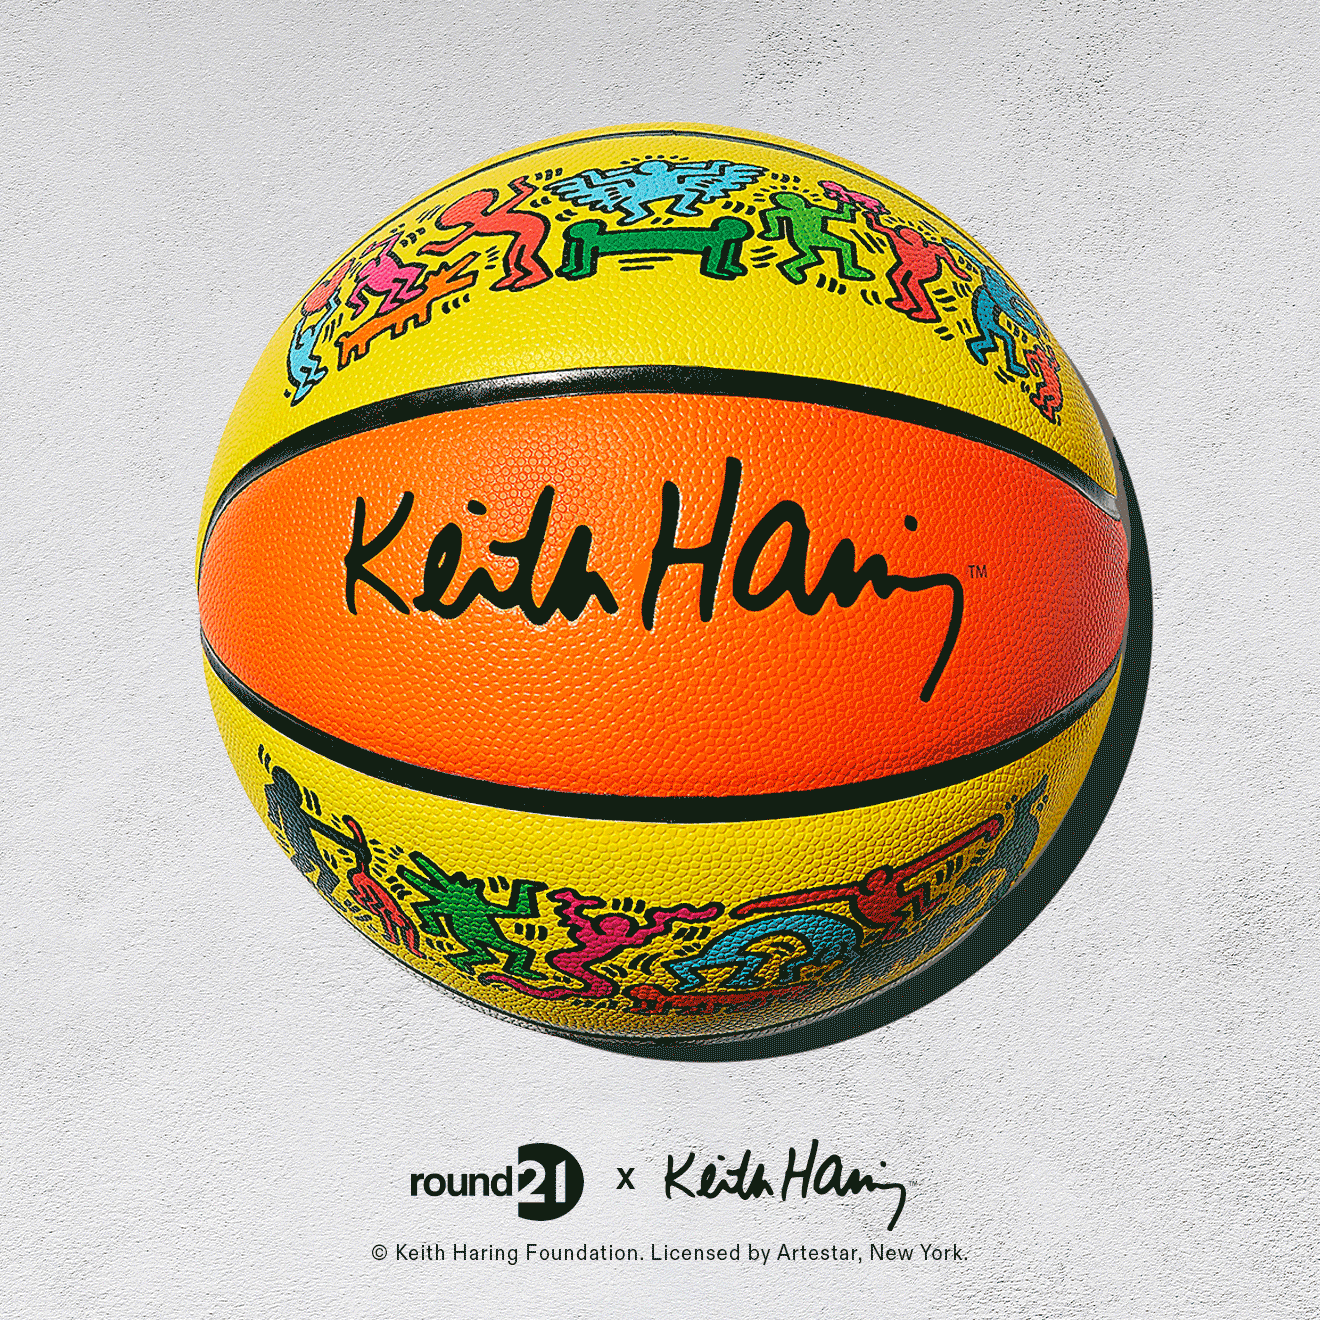 Keith Haring “All Are Welcome” Basketball